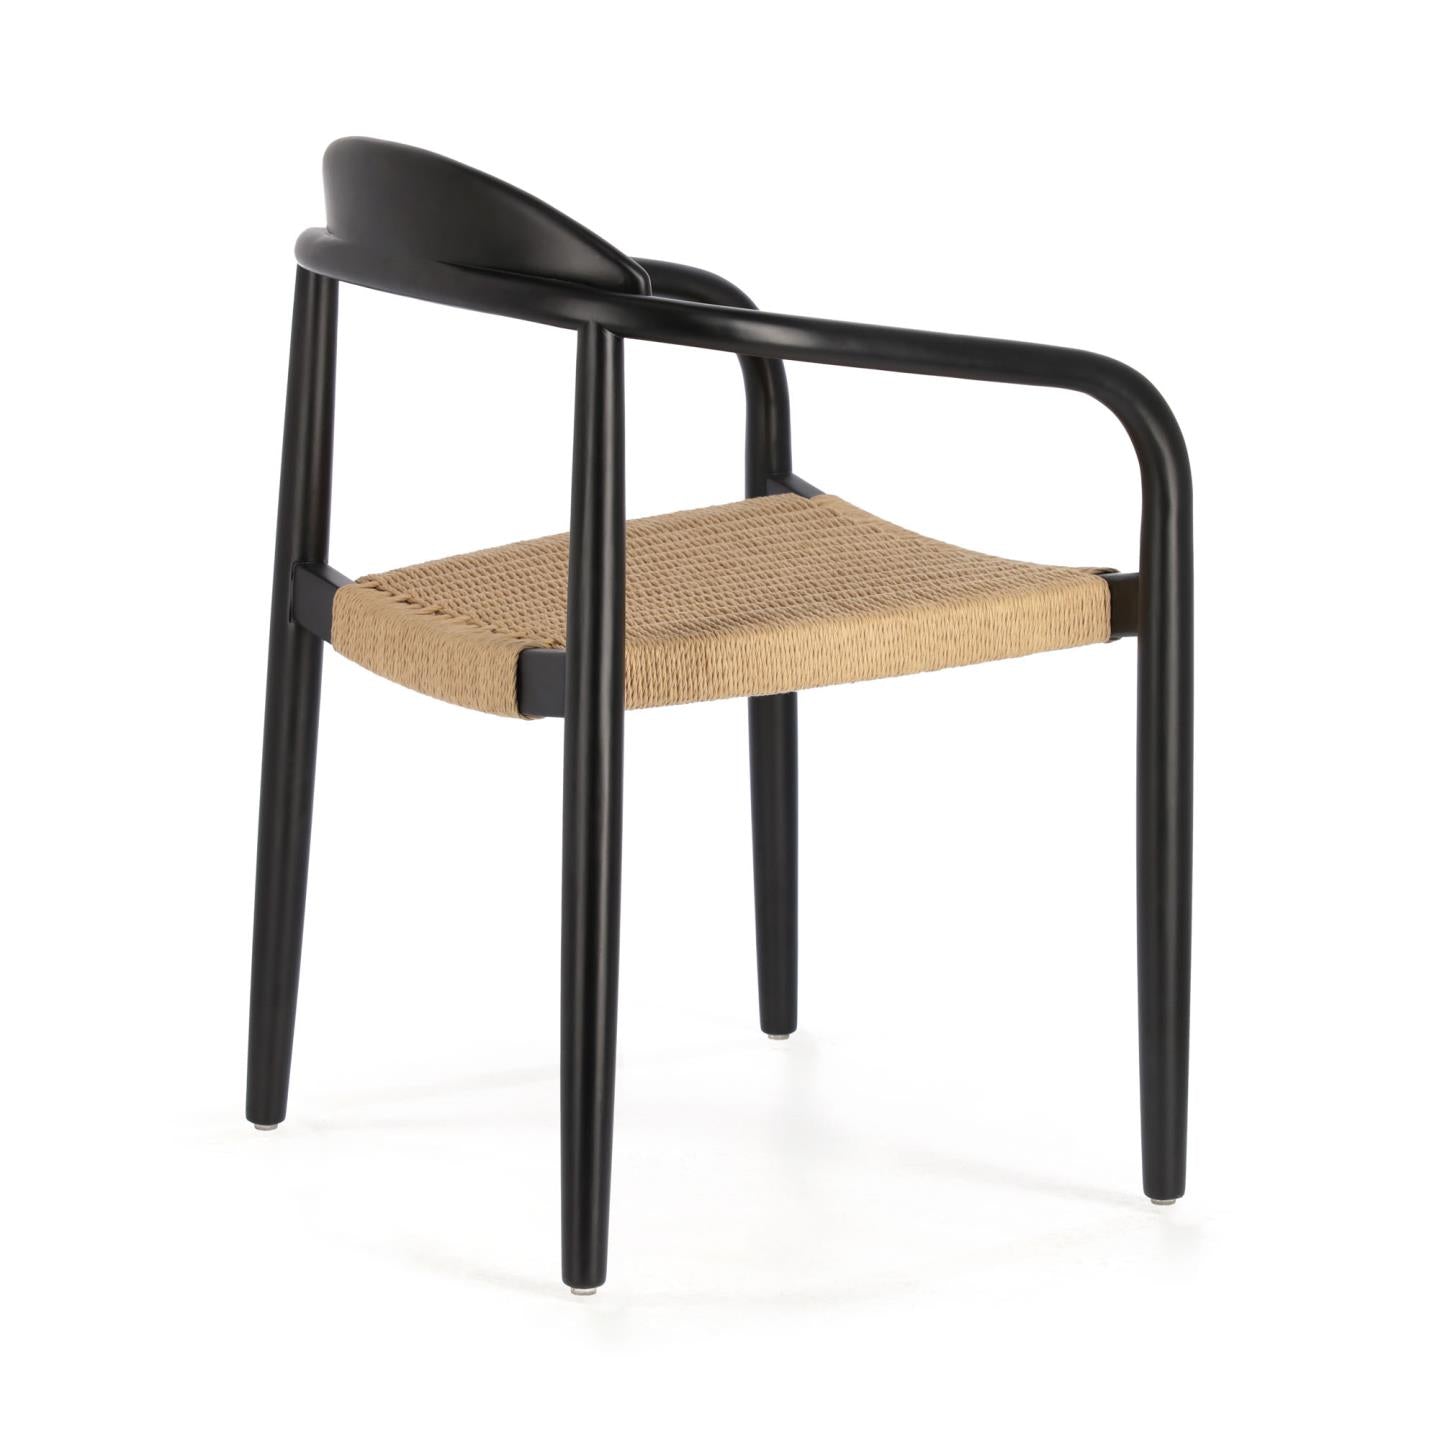 Nina stackable chair in solid acacia wood with black finish and beige paper rope seat